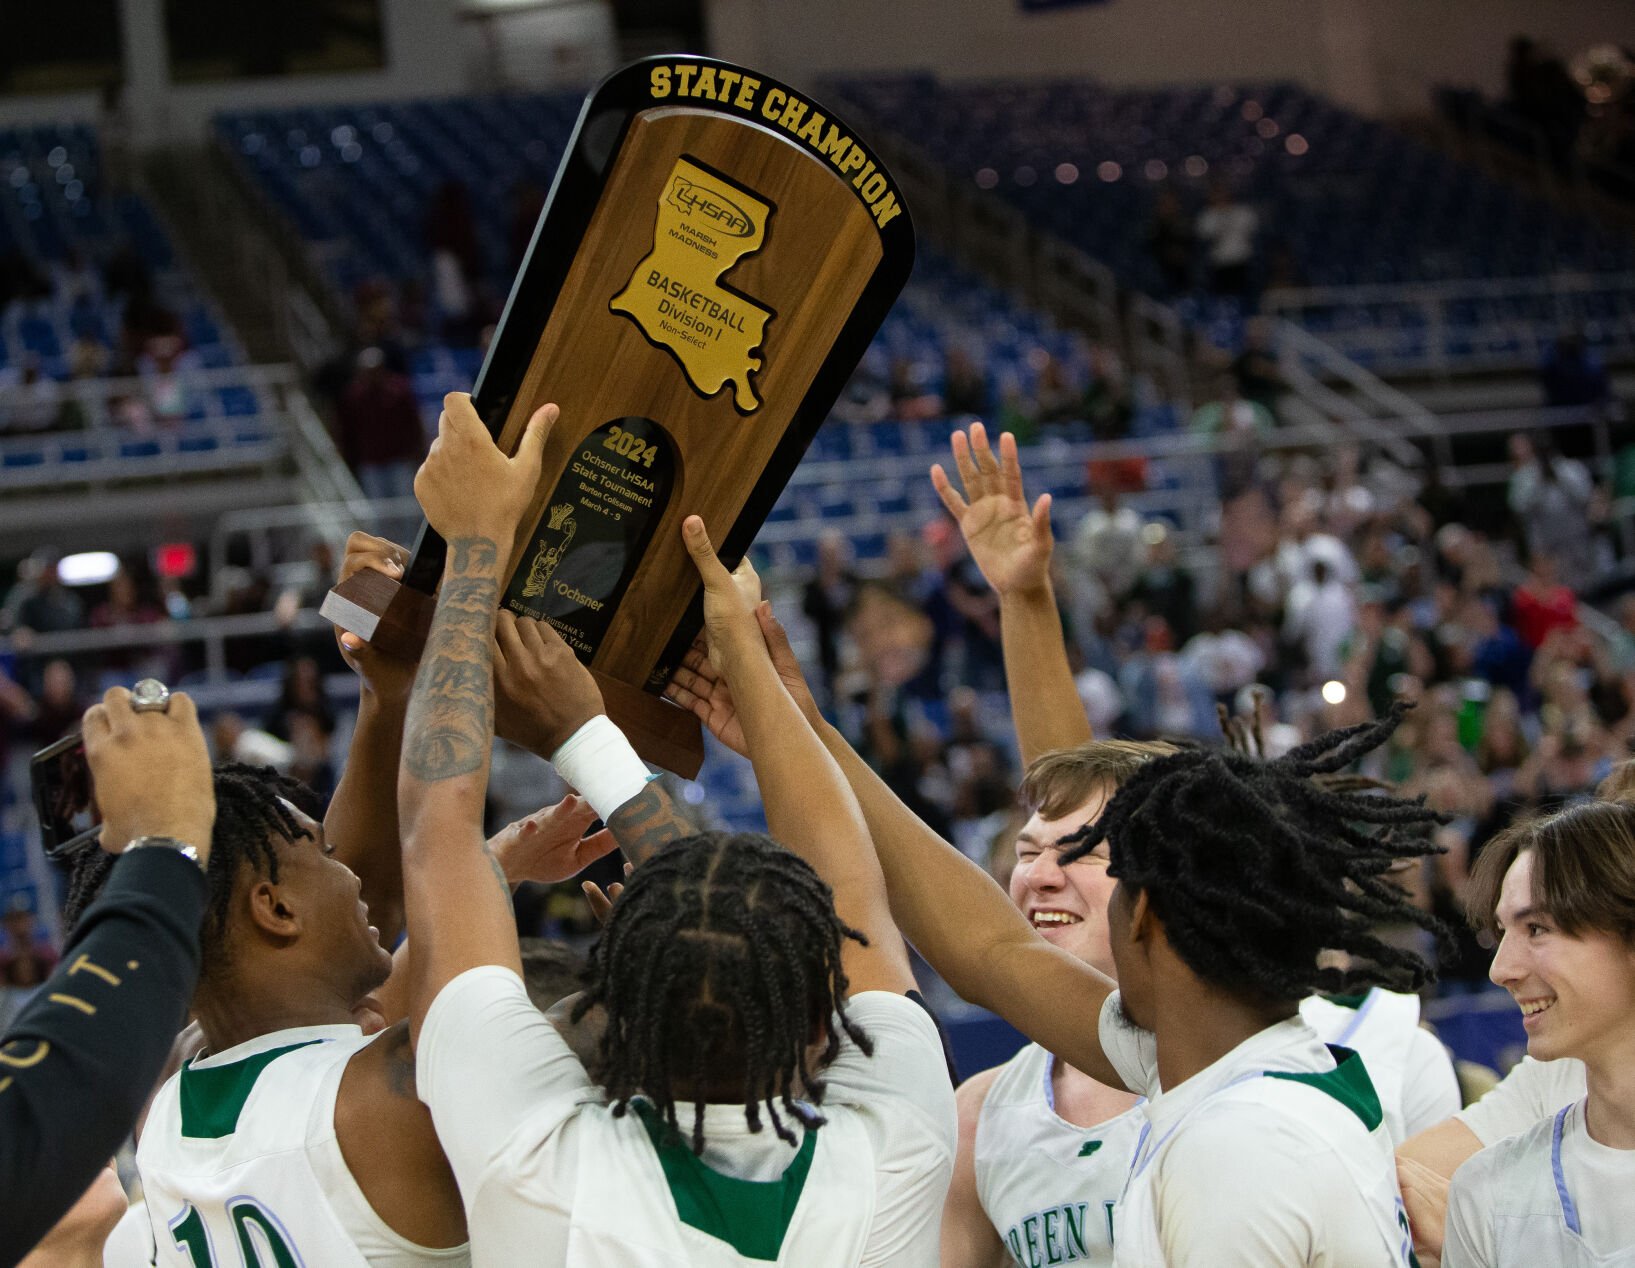 Ponchatoula Secures Back-to-Back State Titles with Explosive Second Half Win